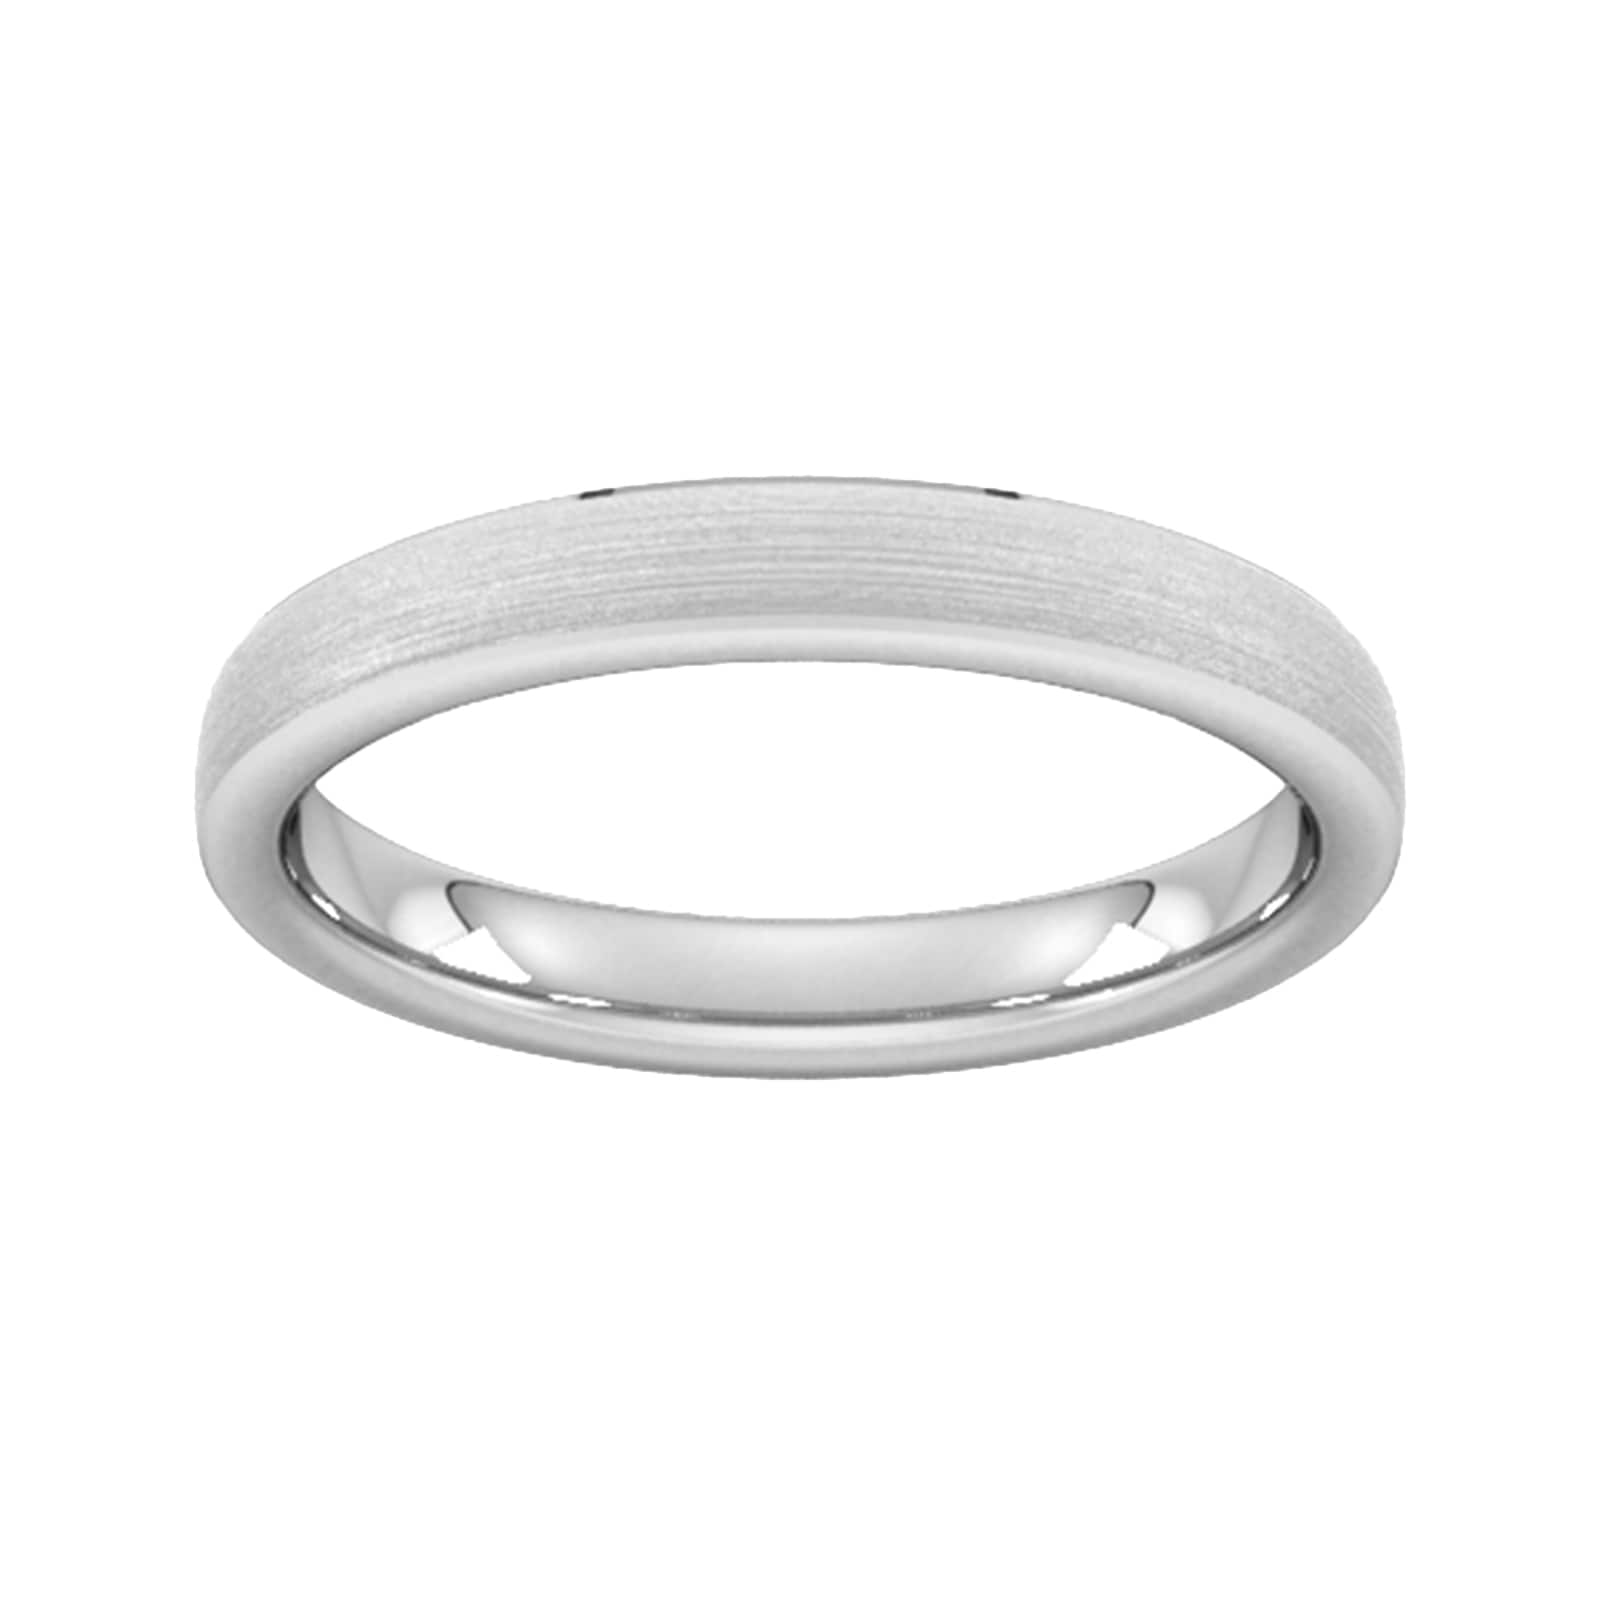 3mm Slight Court Standard Polished Chamfered Edges With Matt Centre Wedding Ring In 18 Carat White Gold - Ring Size Y